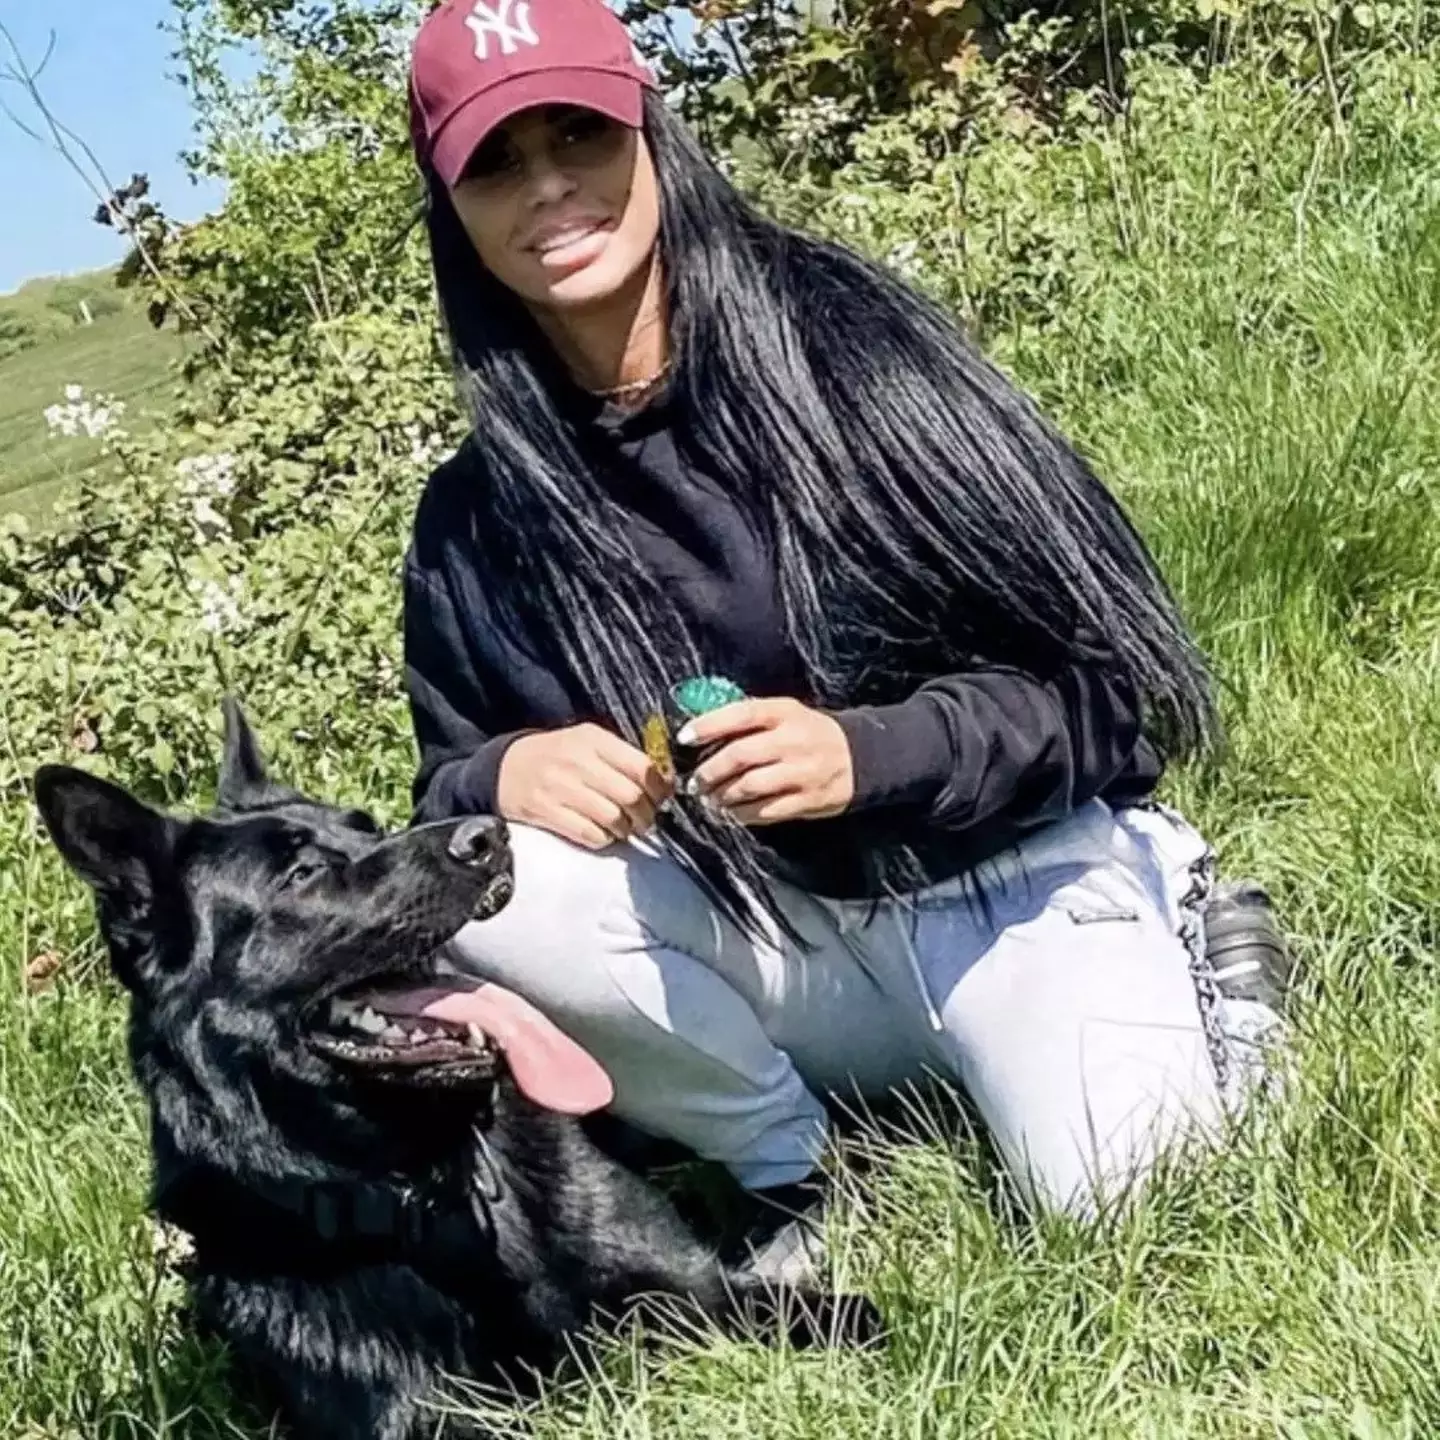 Price announced her dog Blade died in an emotional Instagram post.